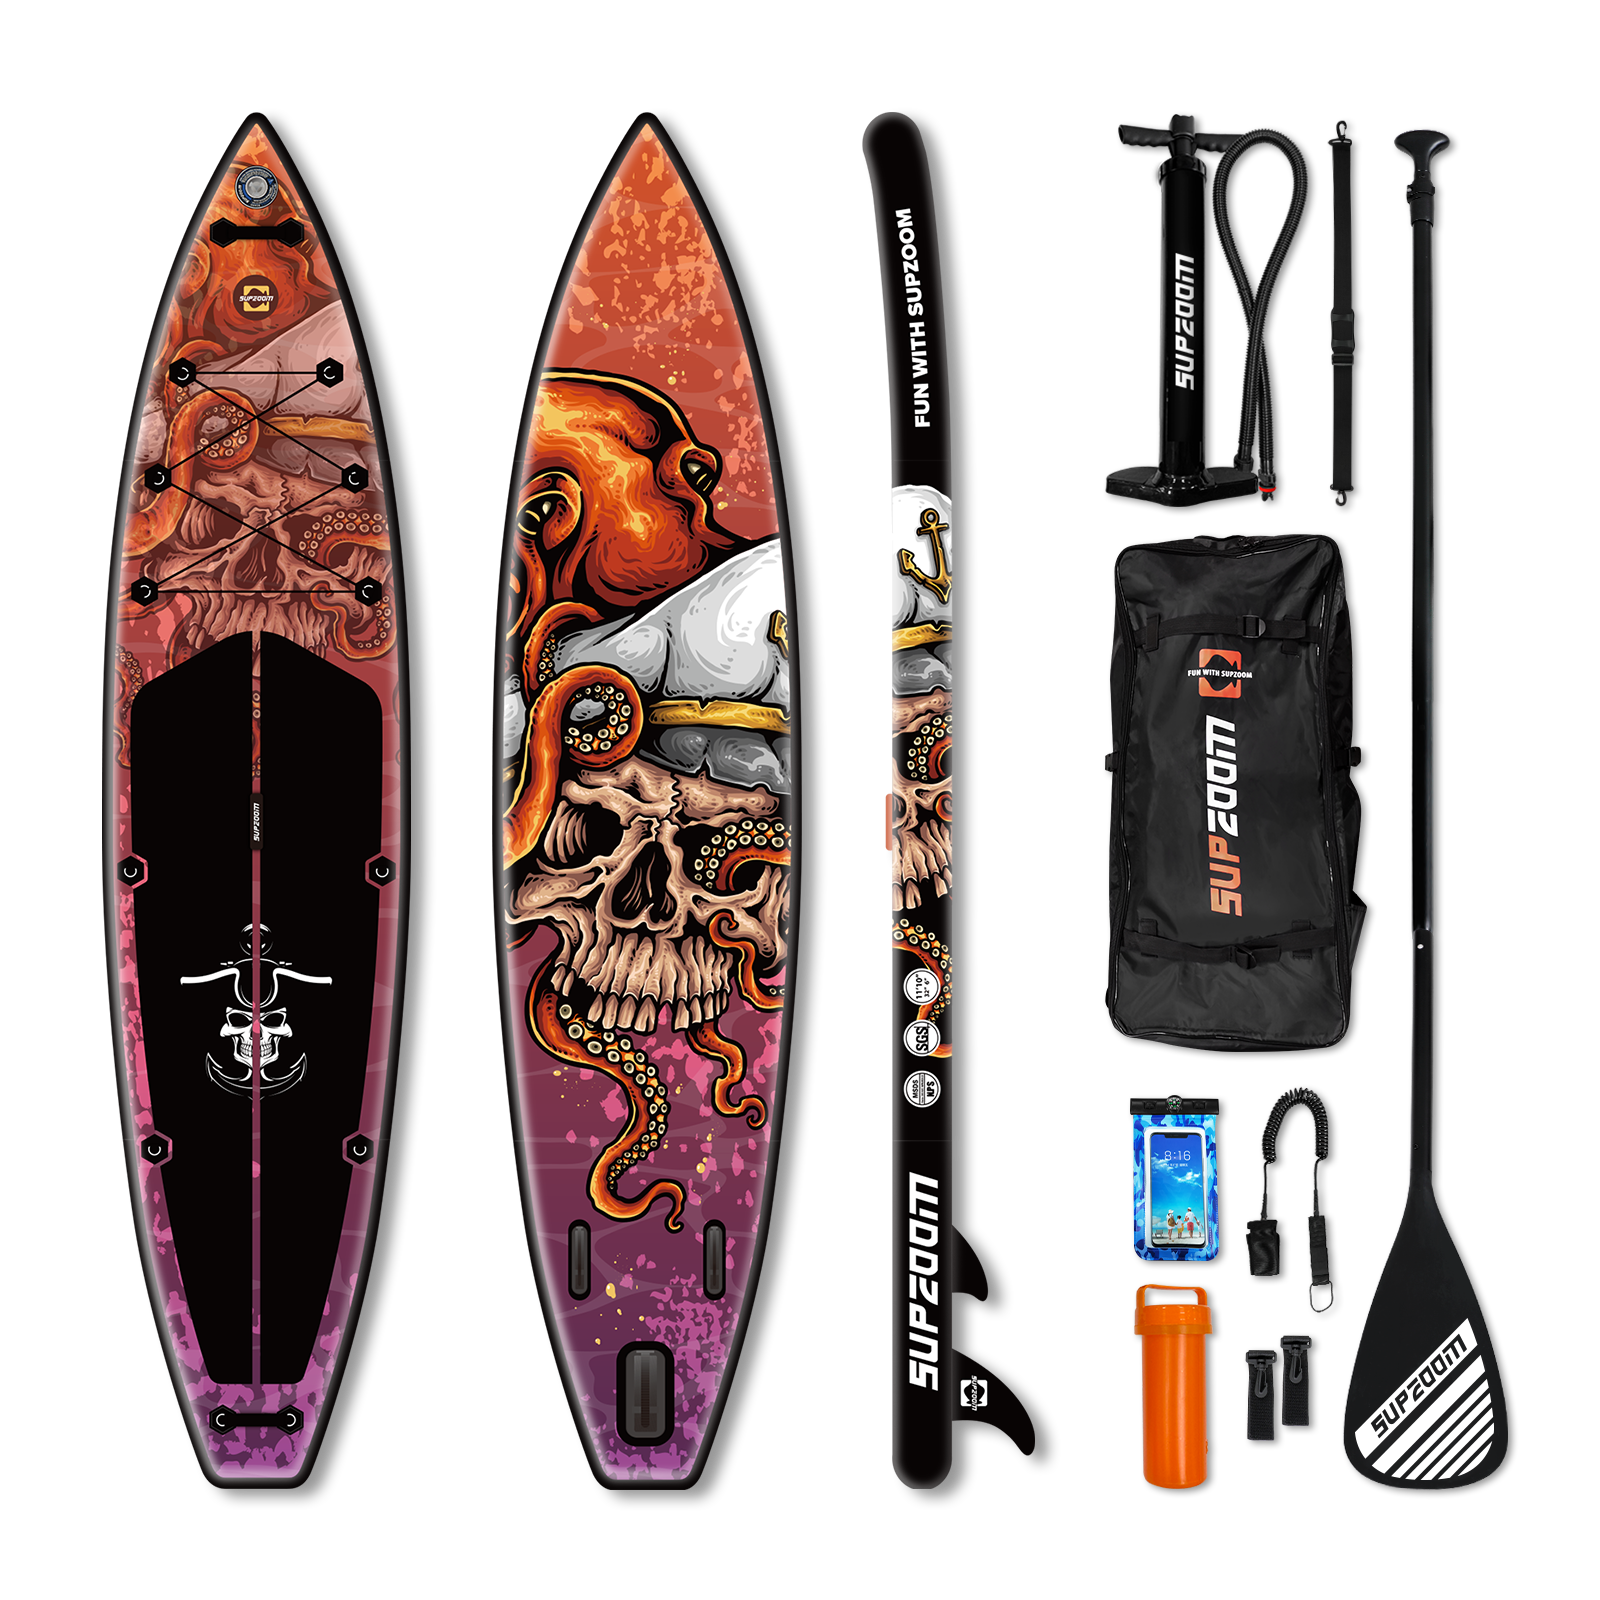 All around 11'10'' inflatable stand up paddle board | Supzoom Halloween-Skull style